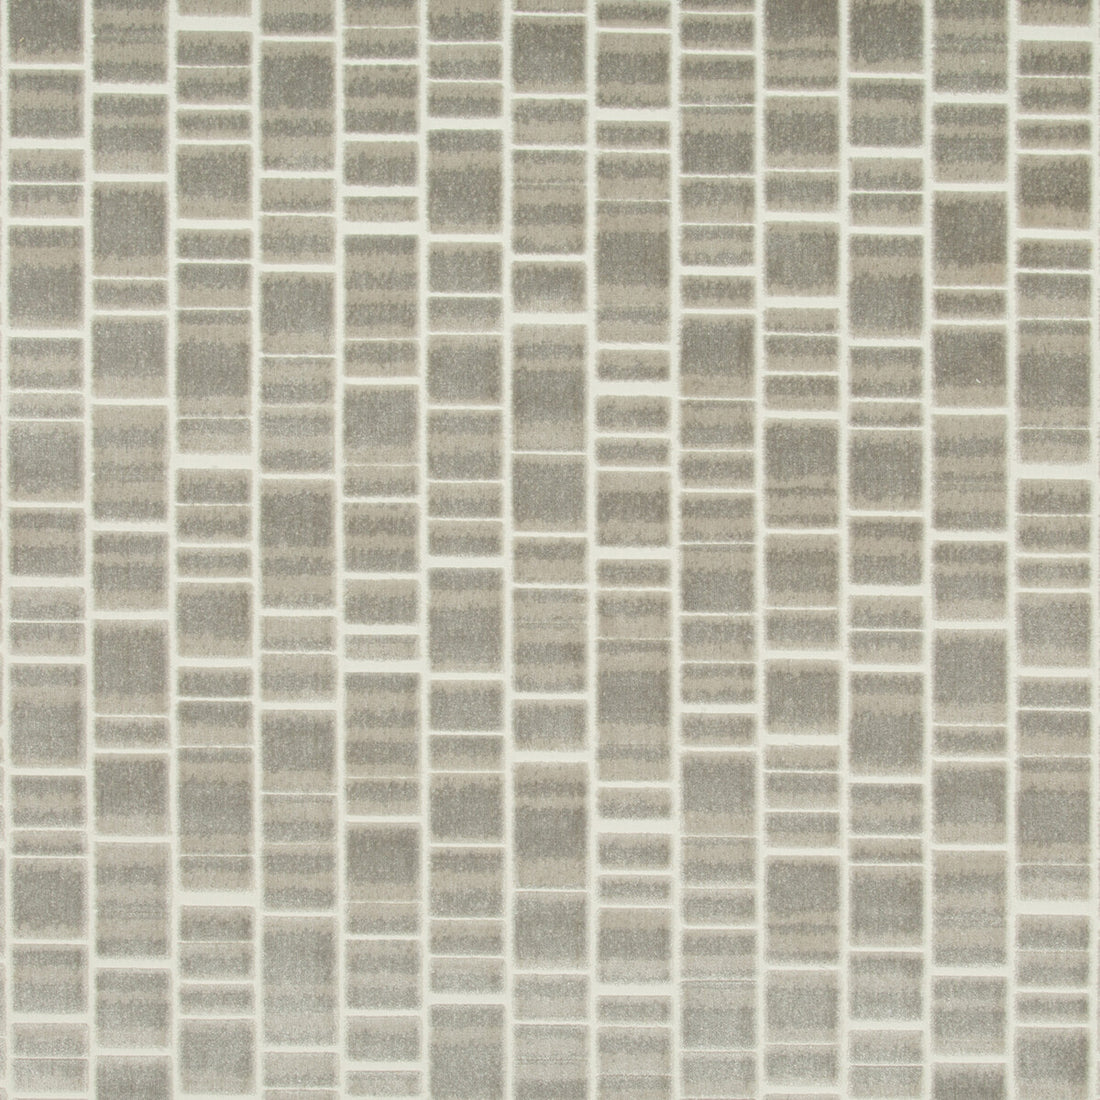 Caisson fabric in pewter color - pattern 34847.11.0 - by Kravet Basics in the Thom Filicia Altitude collection